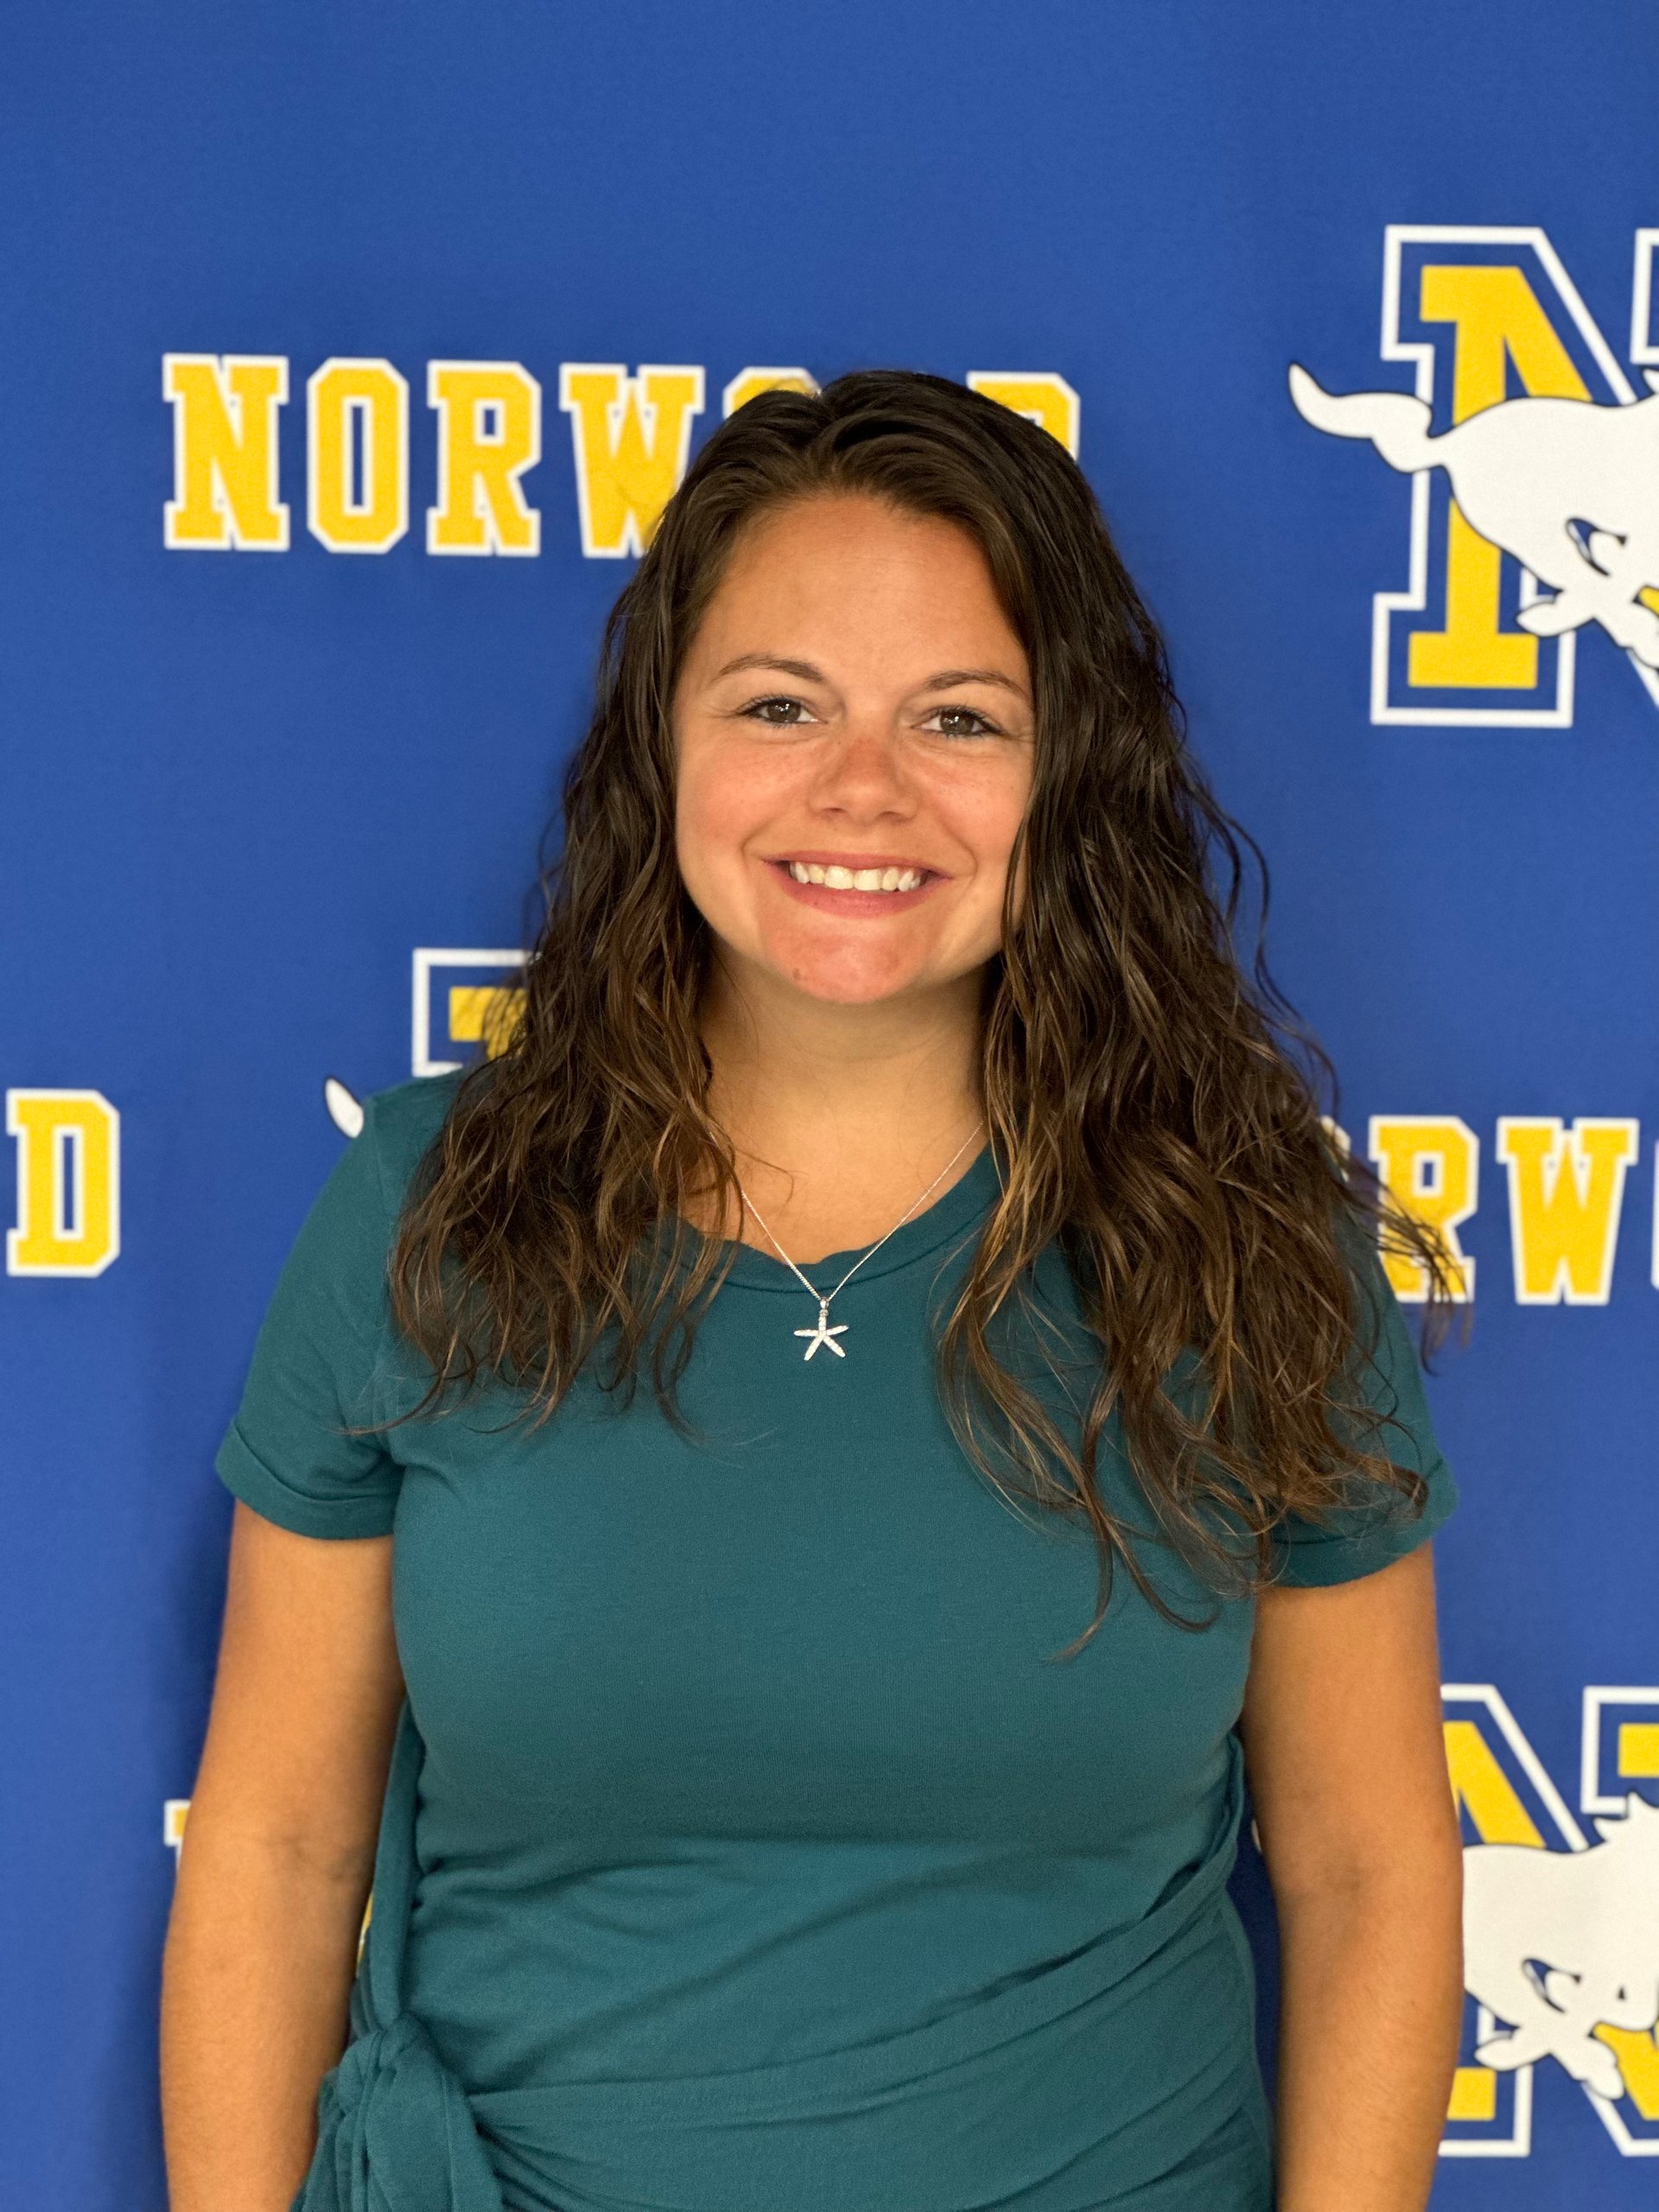 Rotchford selected to attend Women's Coaches Academy - SUNY Morrisville